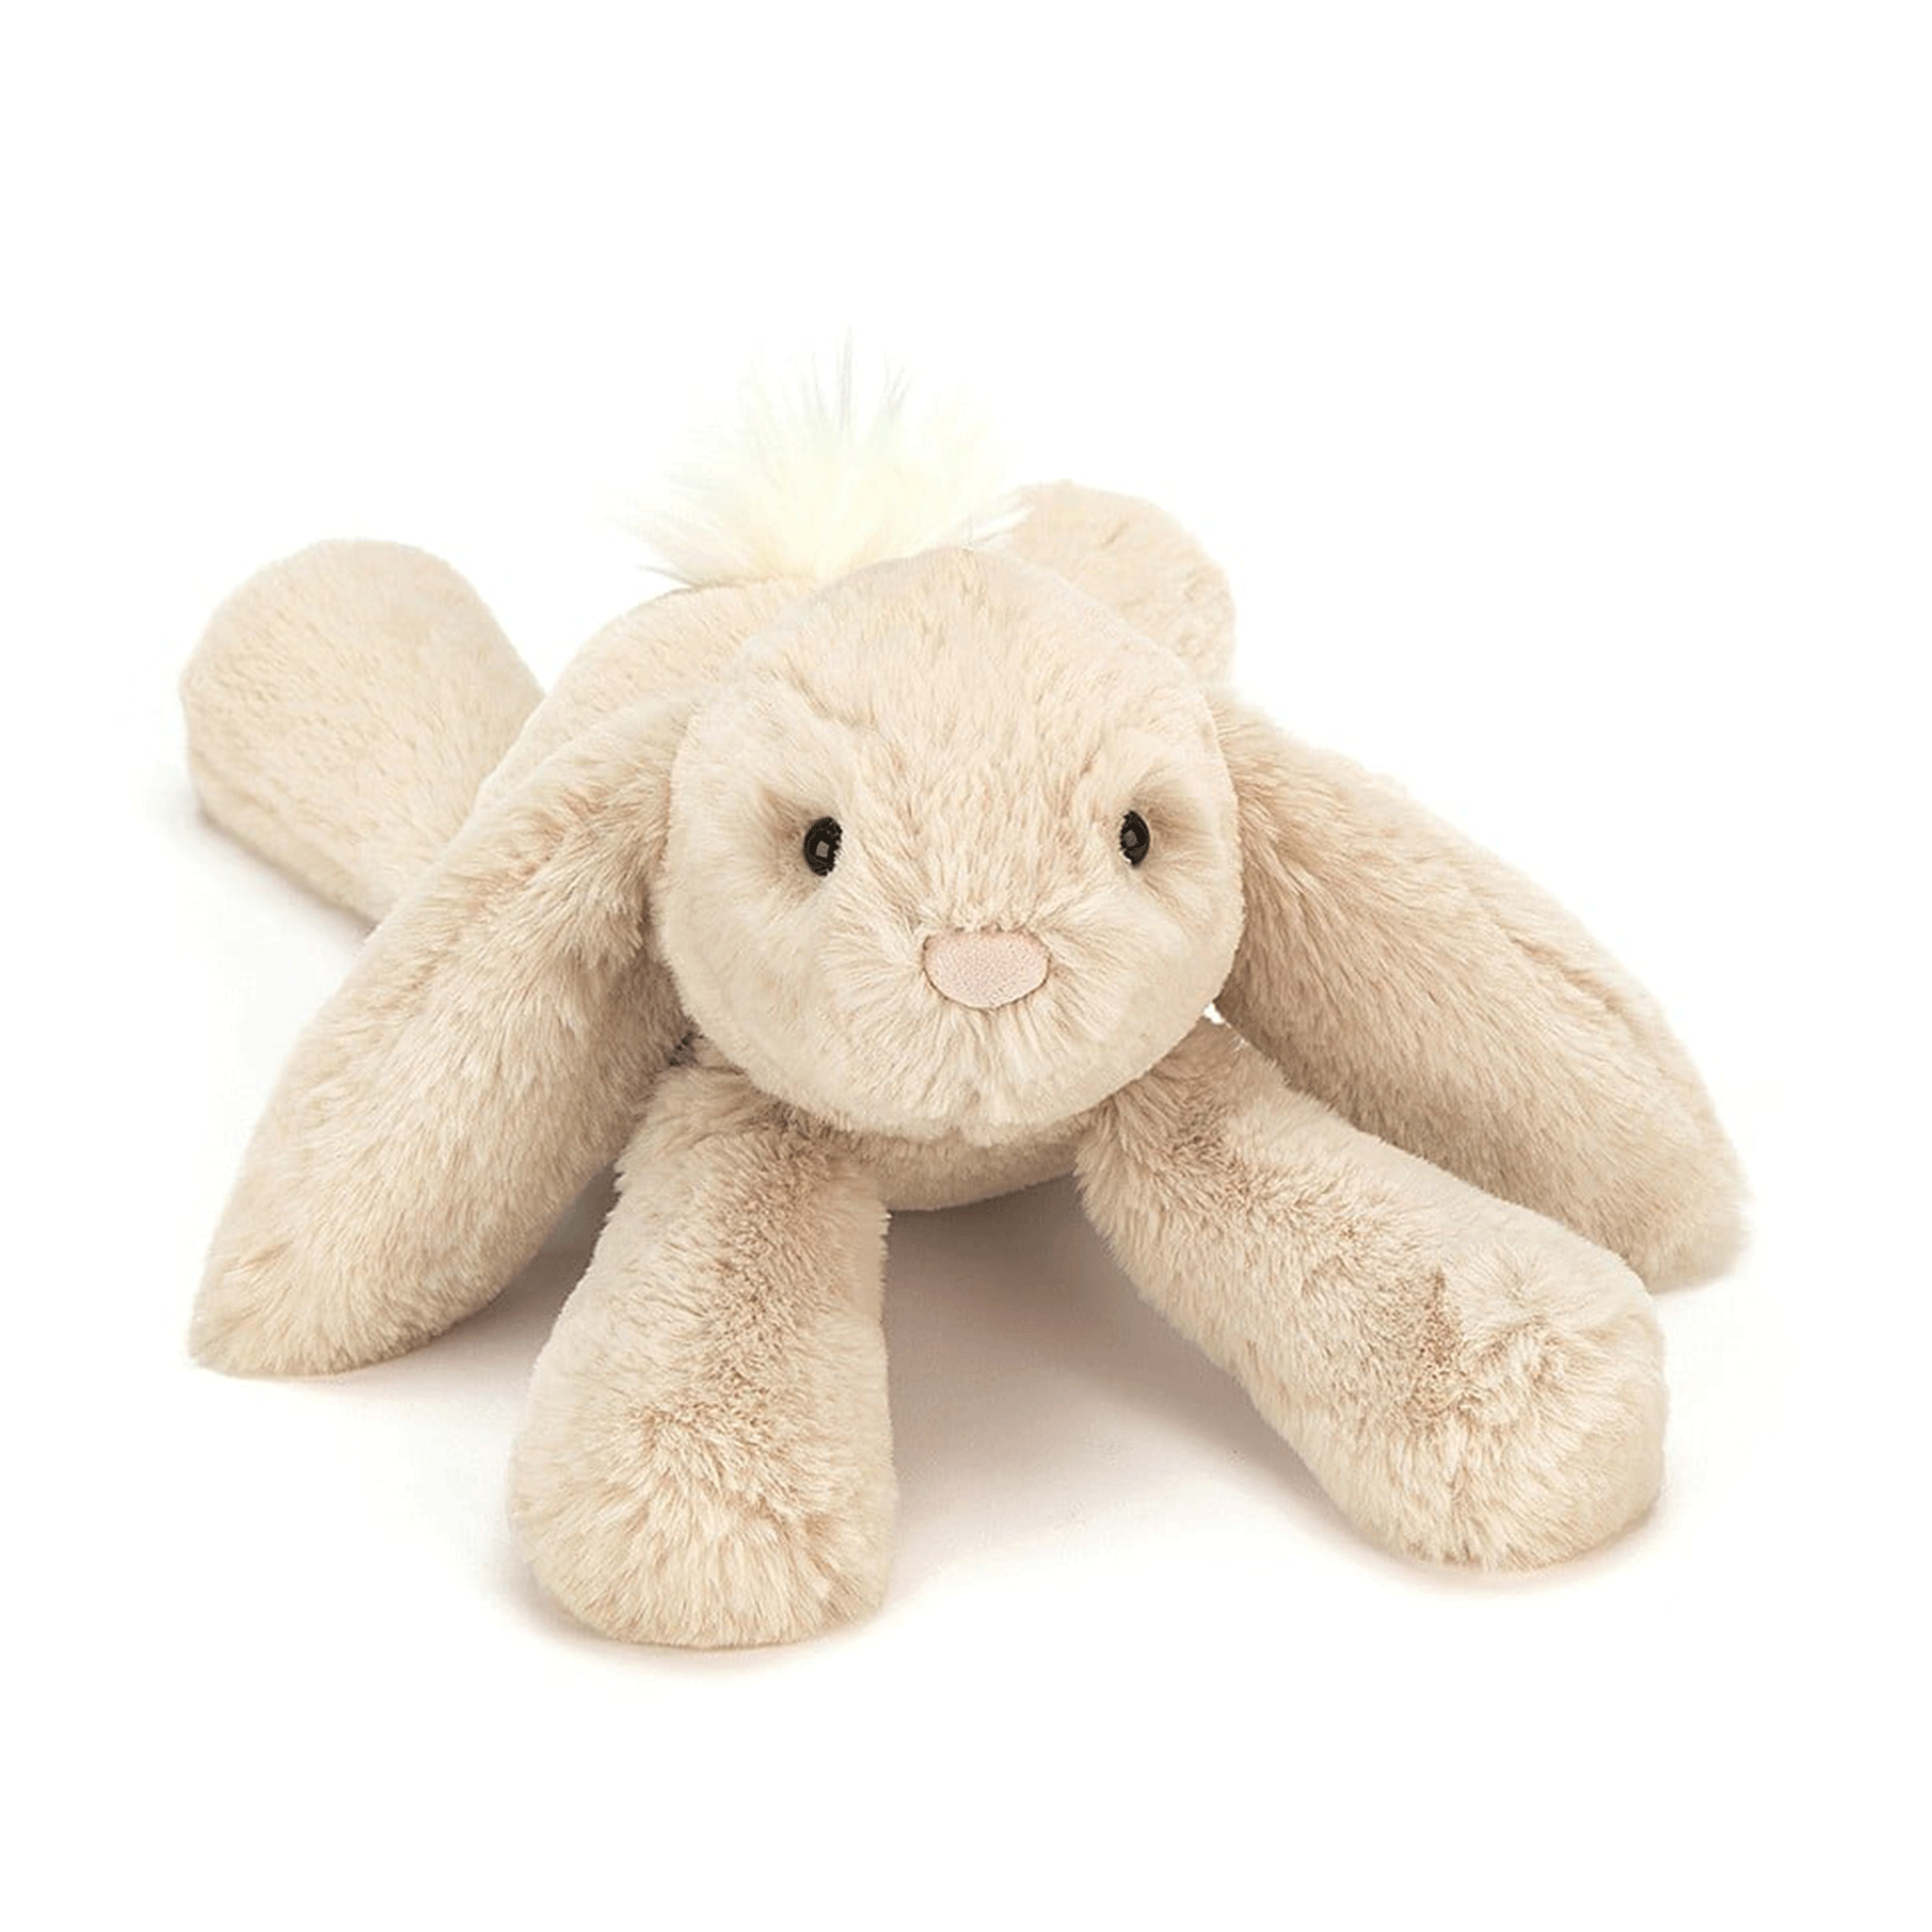 On a white background is a tan / ivory bunny stuffed animal with floppy ears and a fluffy tail.